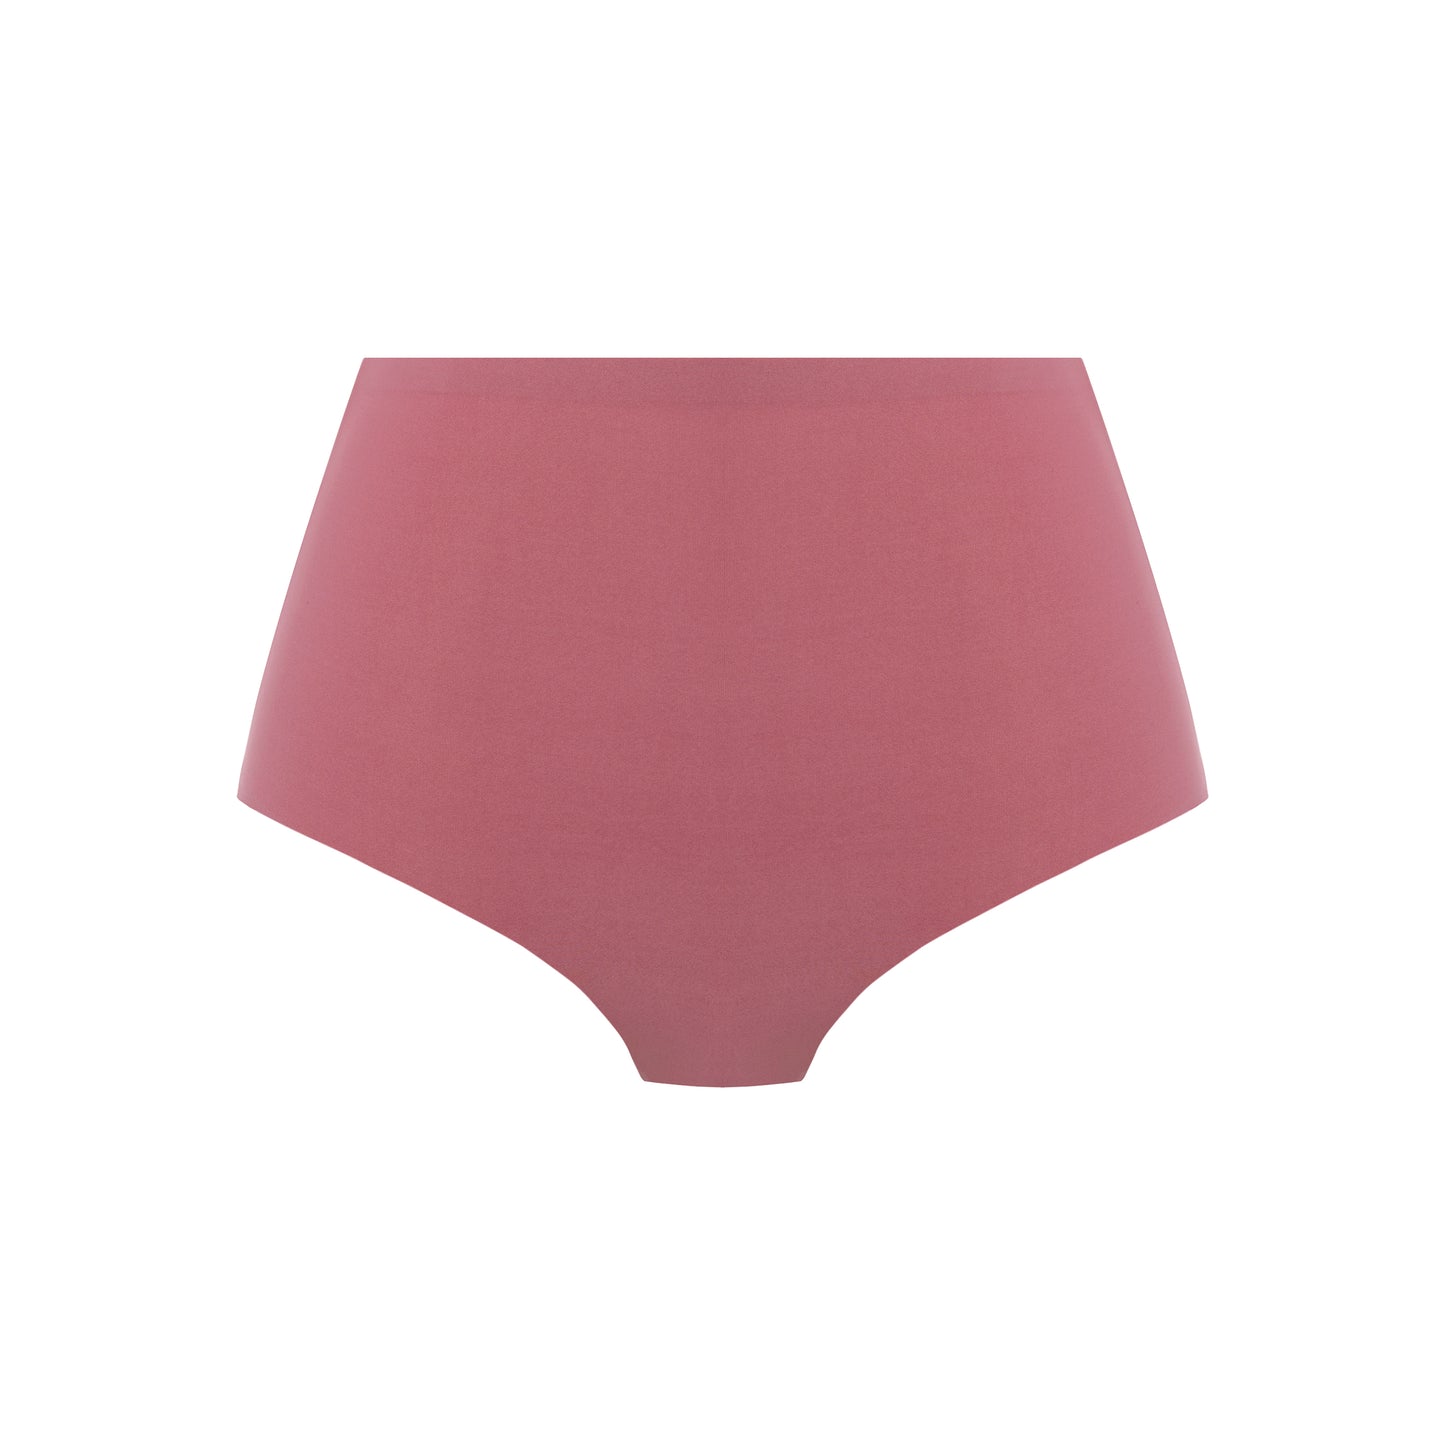 Smoothease Invisible Stretch Full Brief FL2328 ROE - Rose